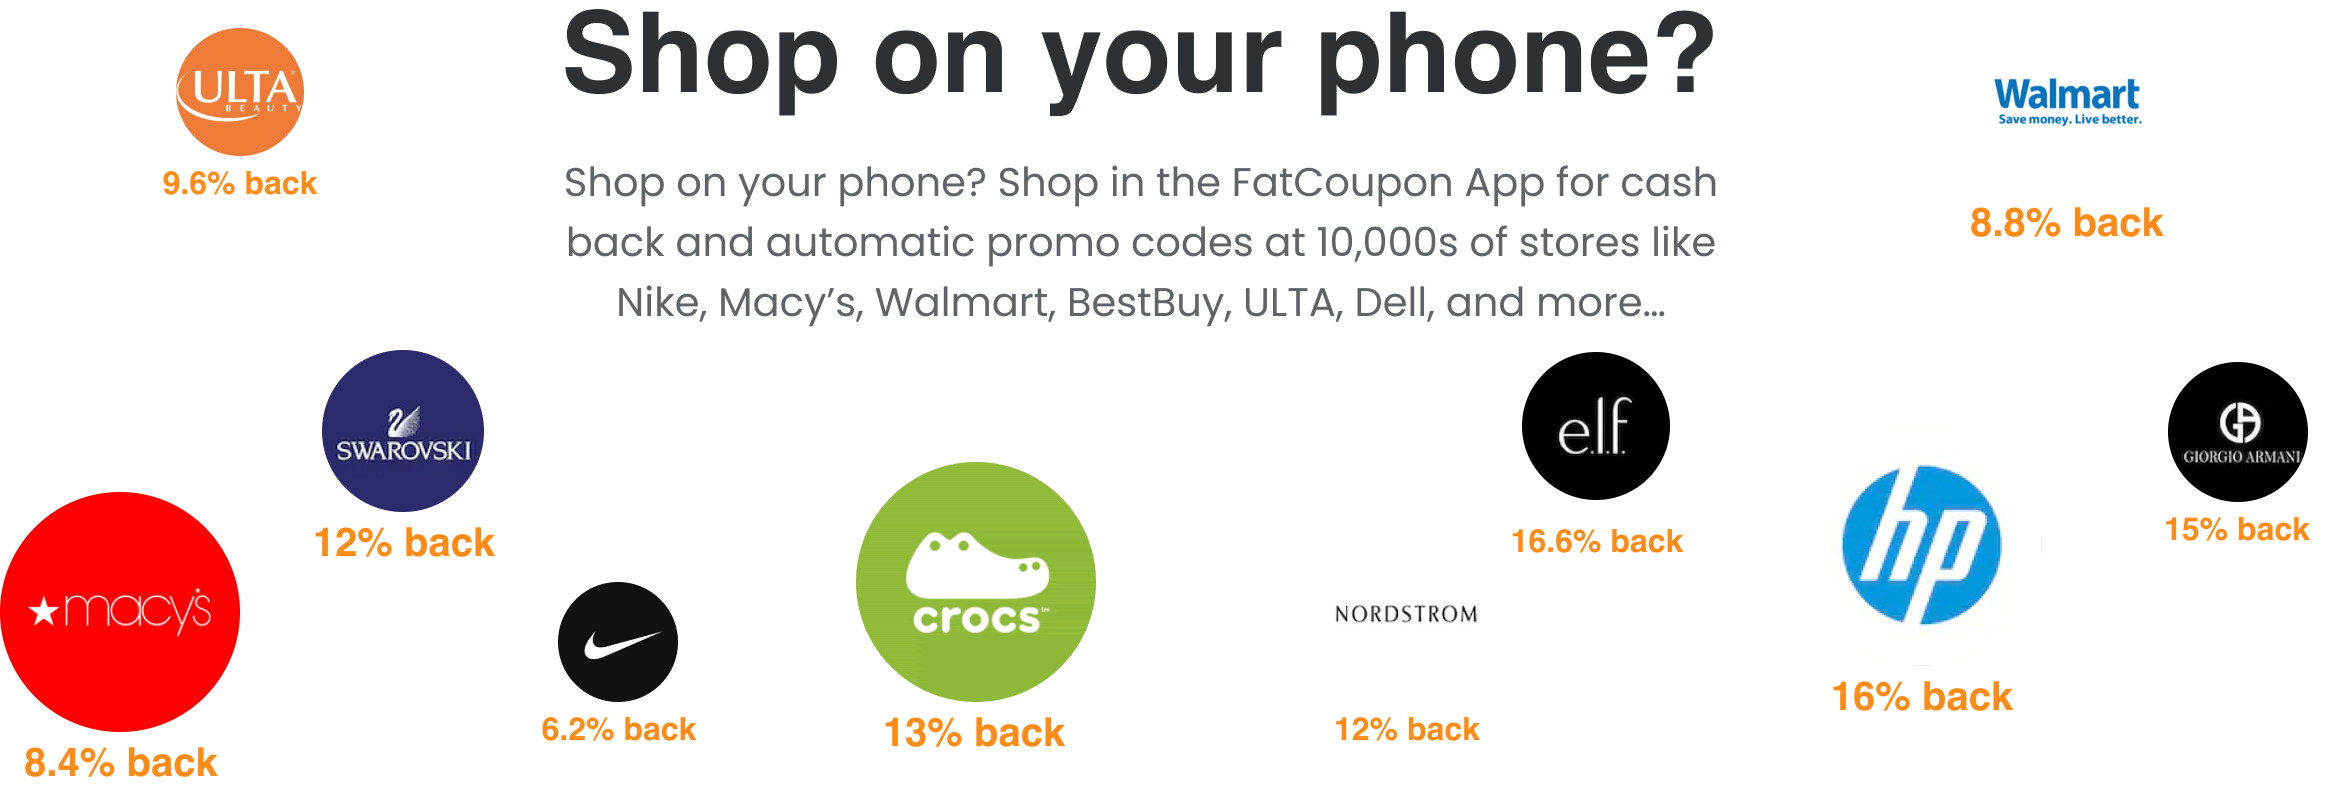 Shop on your phone? Shop in the FatCoupon App for cash back and automatic promo codes at 10,000s of stores like Nike, Macy’s, Walmart, BestBuy, ULTA, Dell, and more…